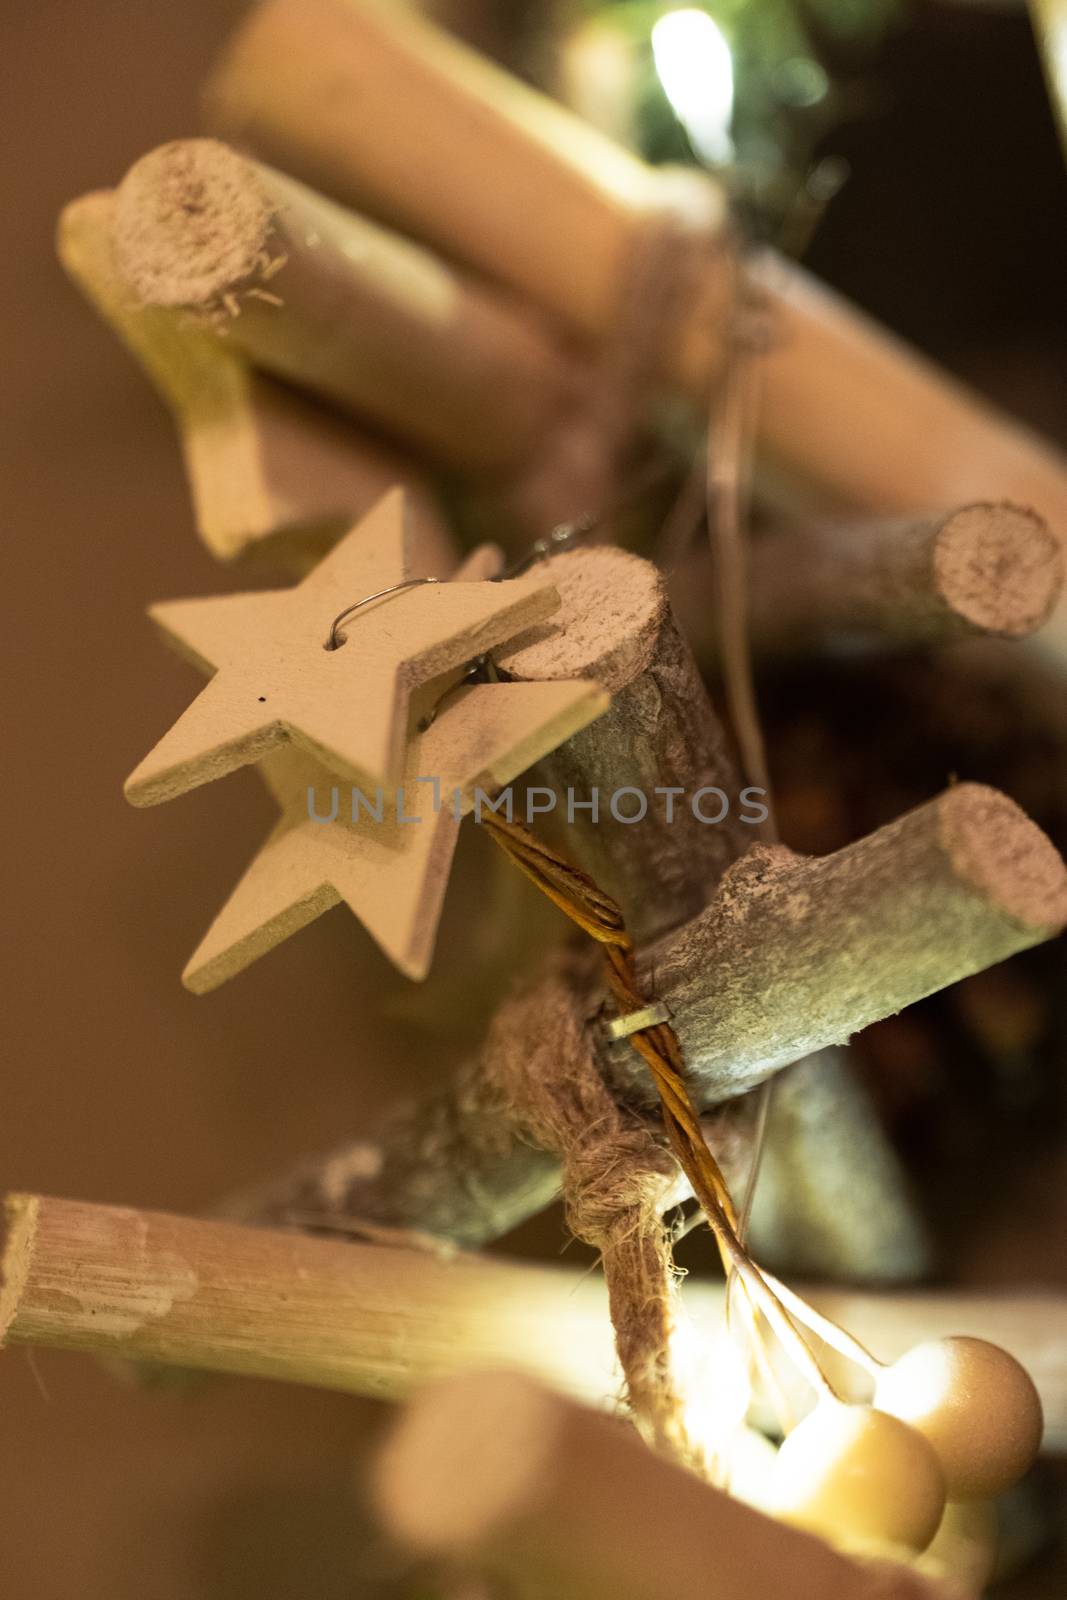 Wooden Christmas Tree Decoration by samULvisuals